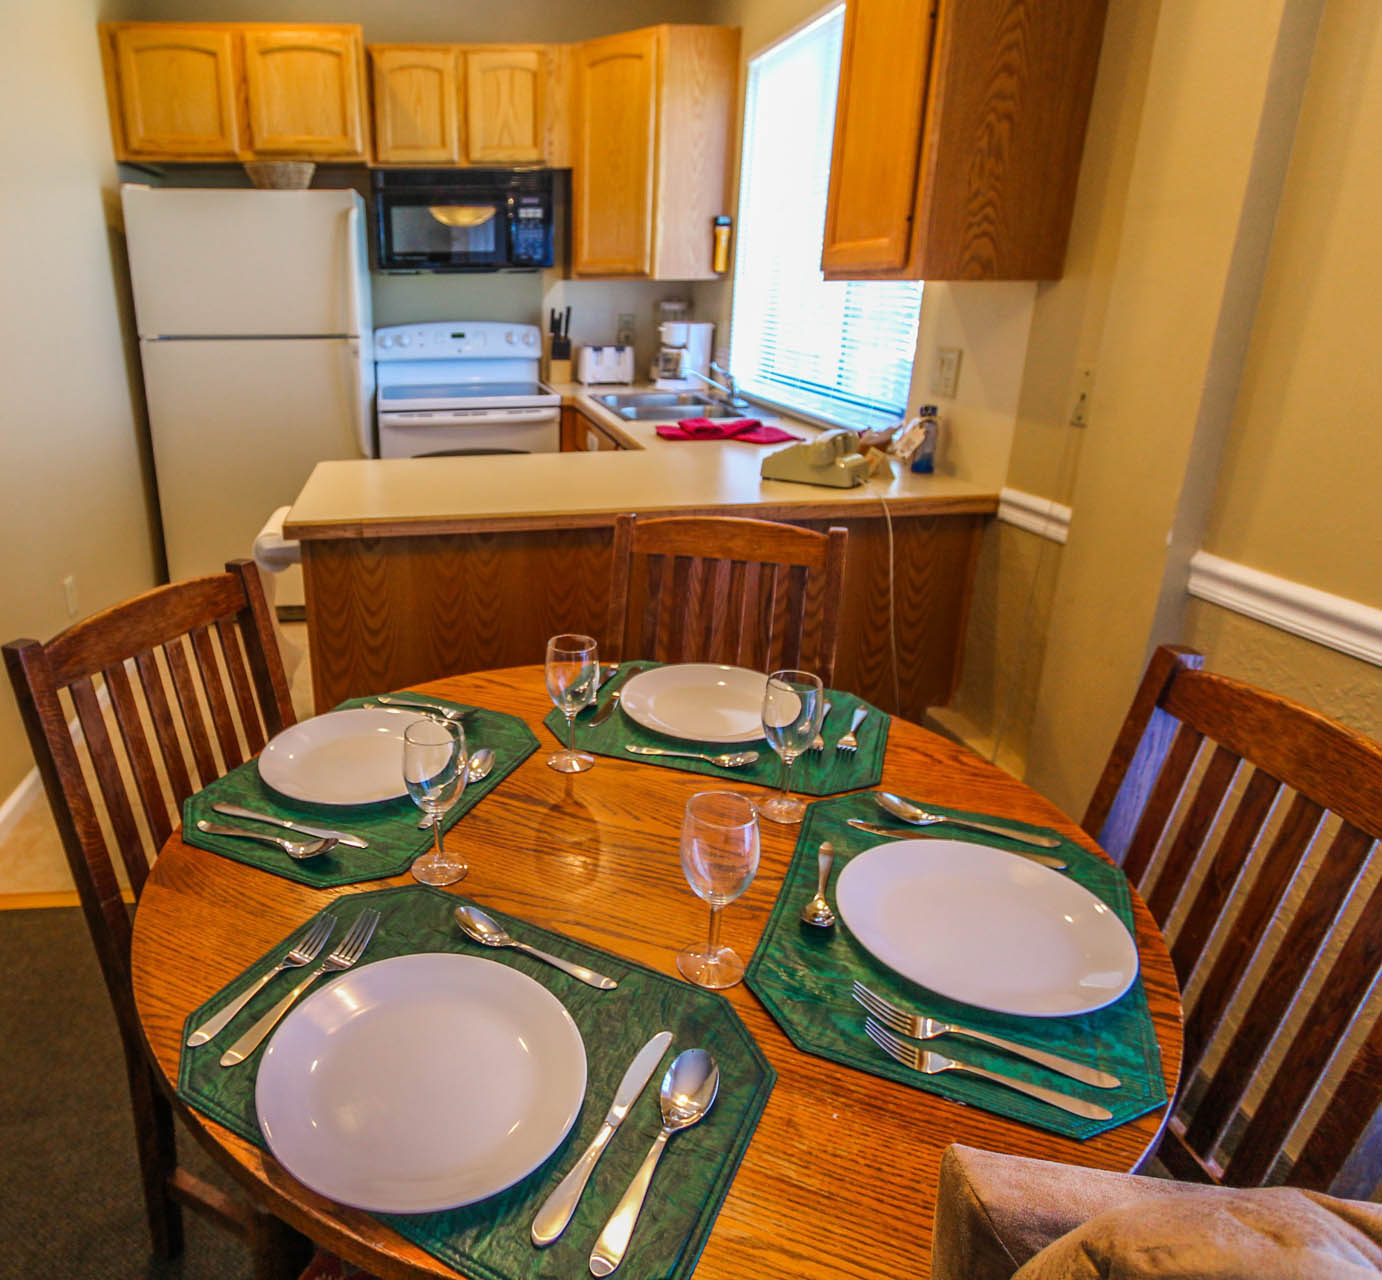 A fully equipped kitchen and dining room at VRI's Powder Ridge Village in Eden, Utah.